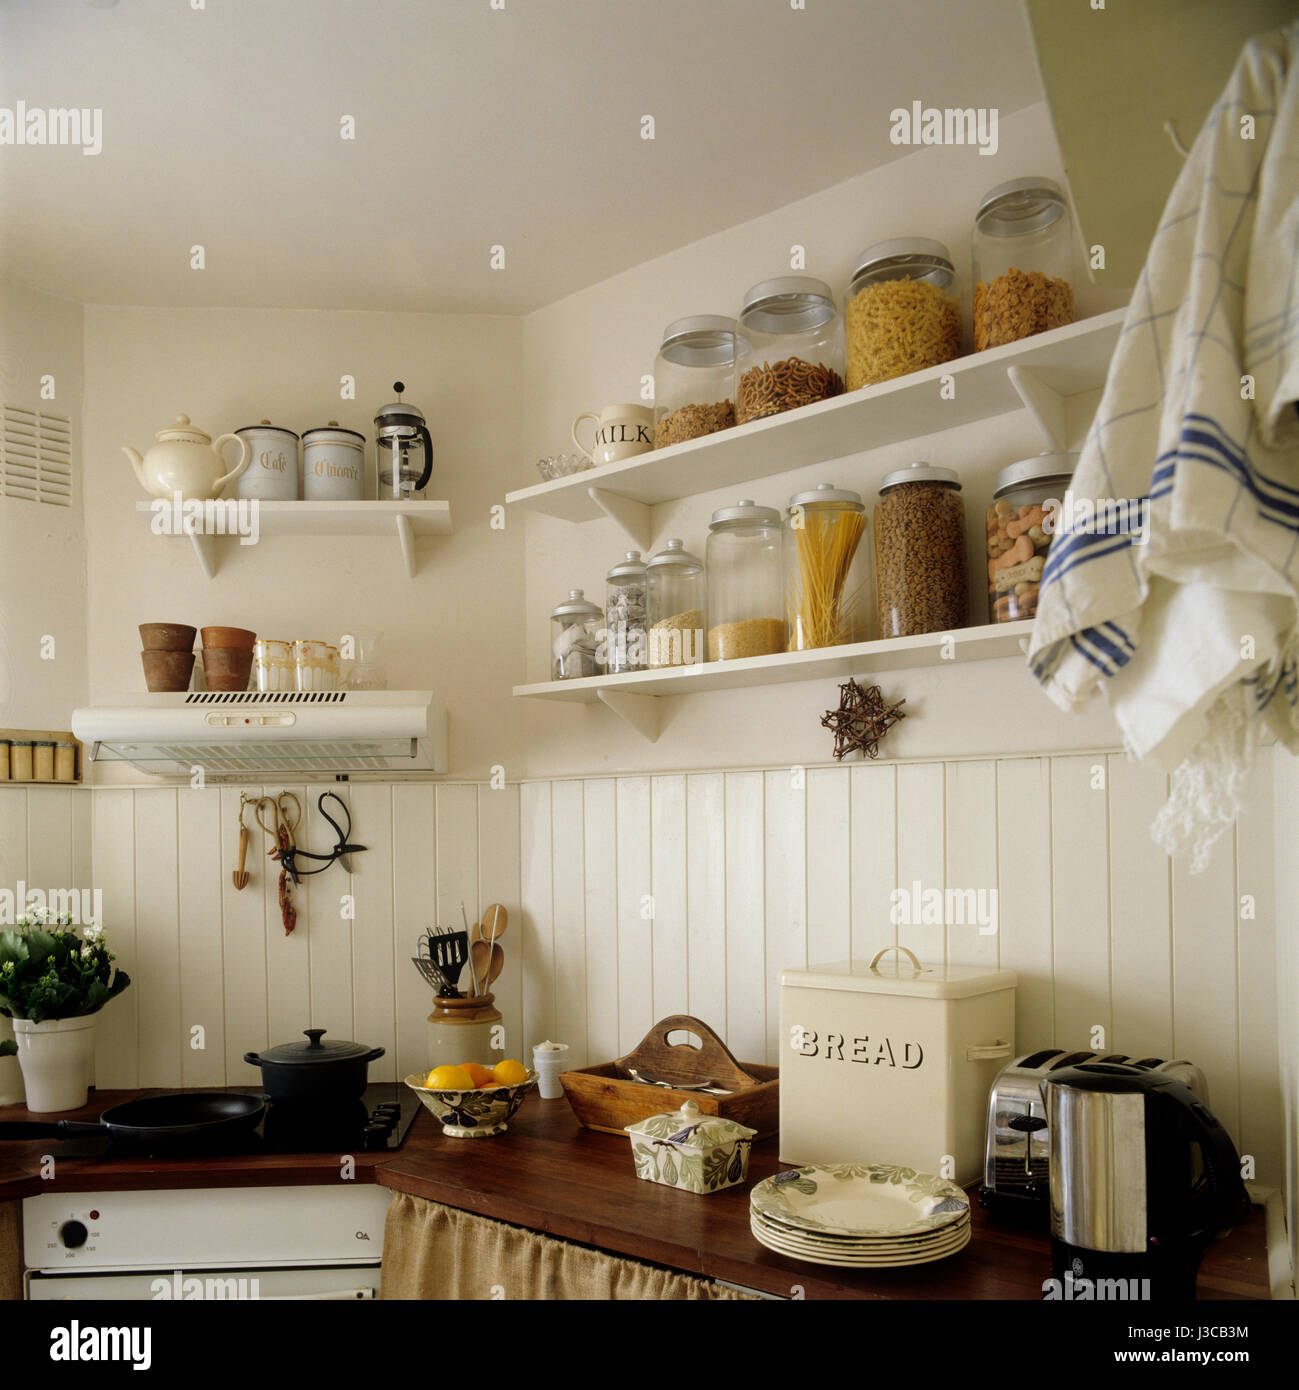 Country style kitchen. Stock Photo